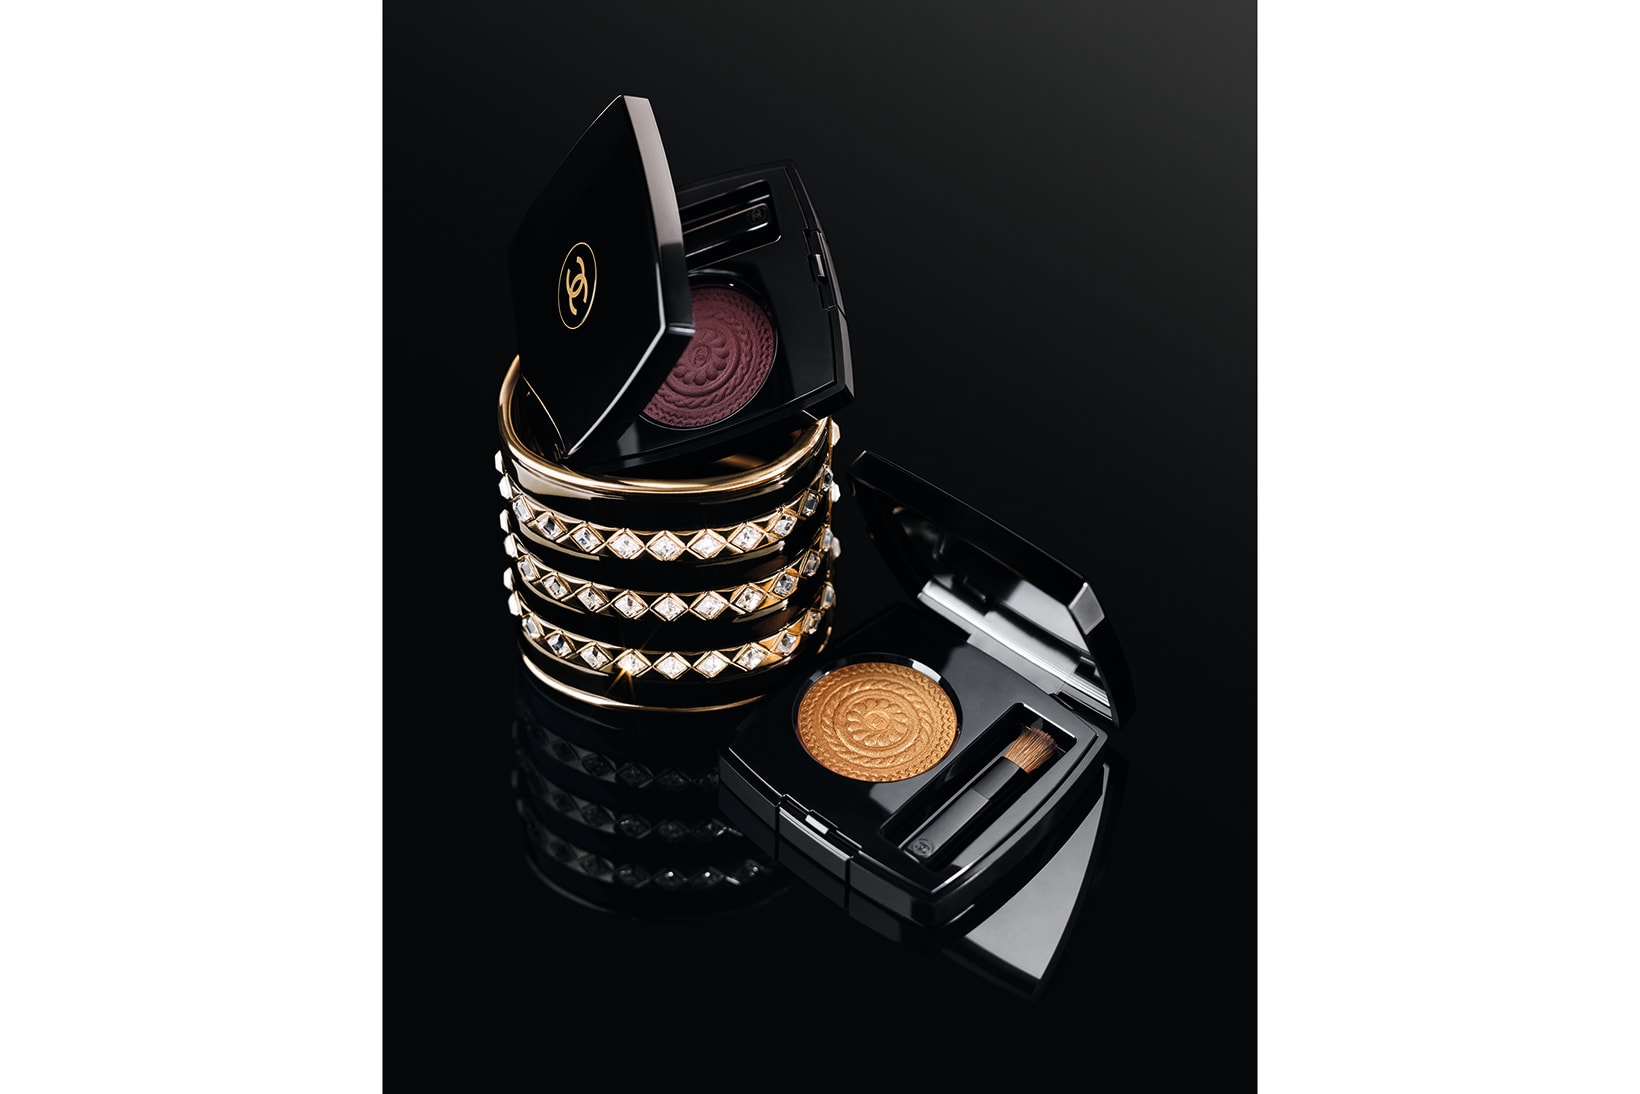 Chanel Holiday 2019 Makeup Collection Eyeshadow Grandeur Poupre Brun